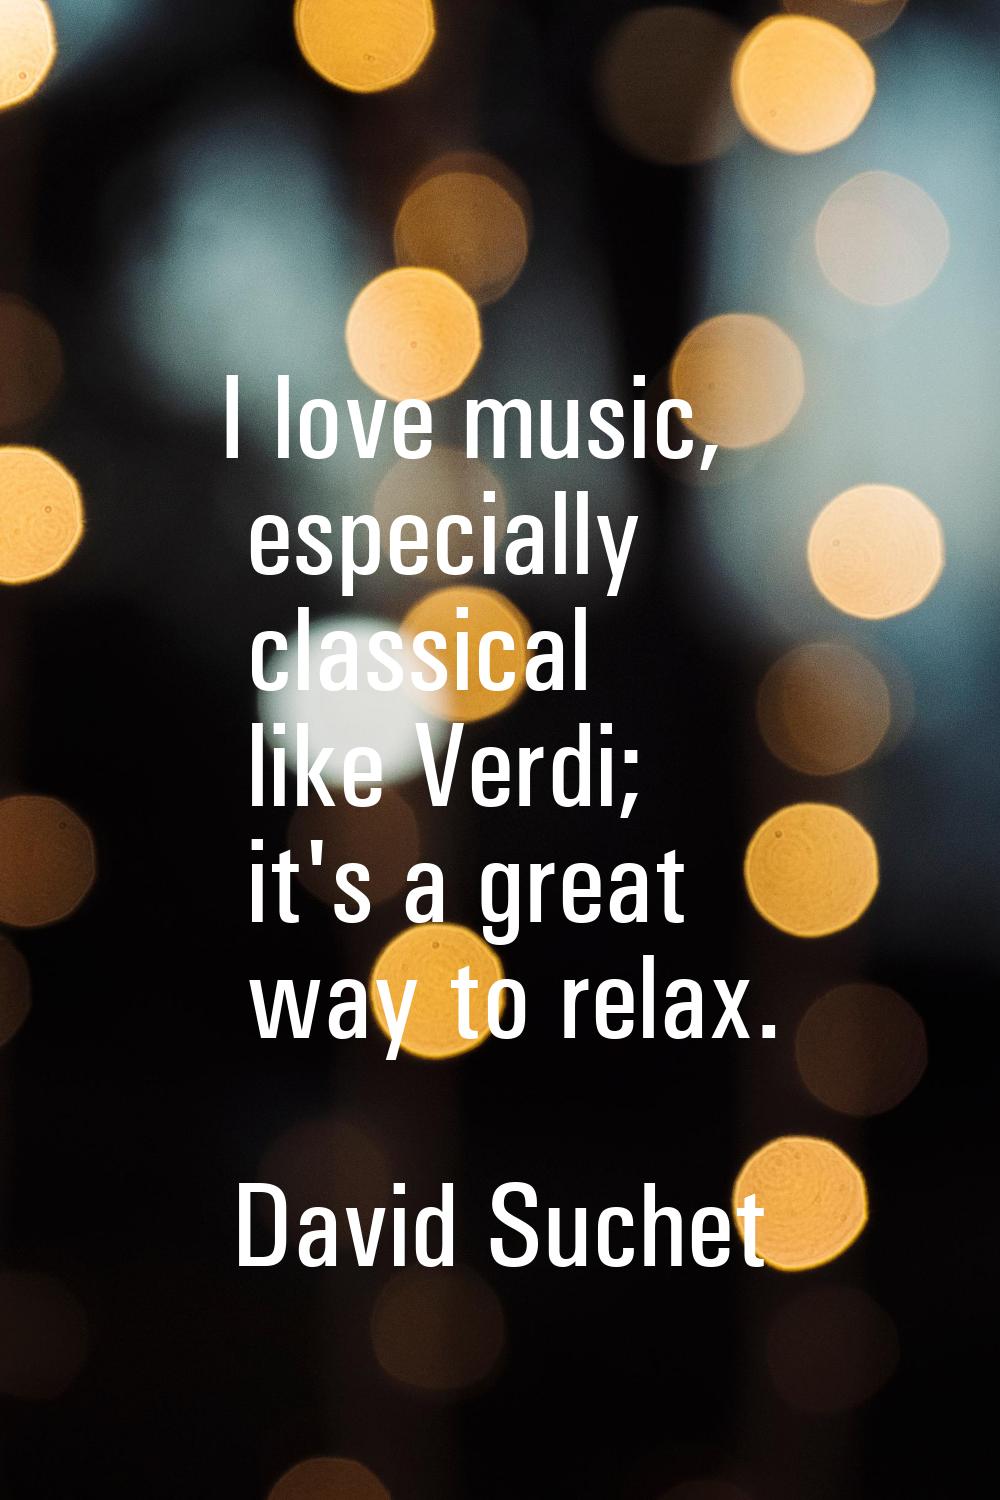 I love music, especially classical like Verdi; it's a great way to relax.